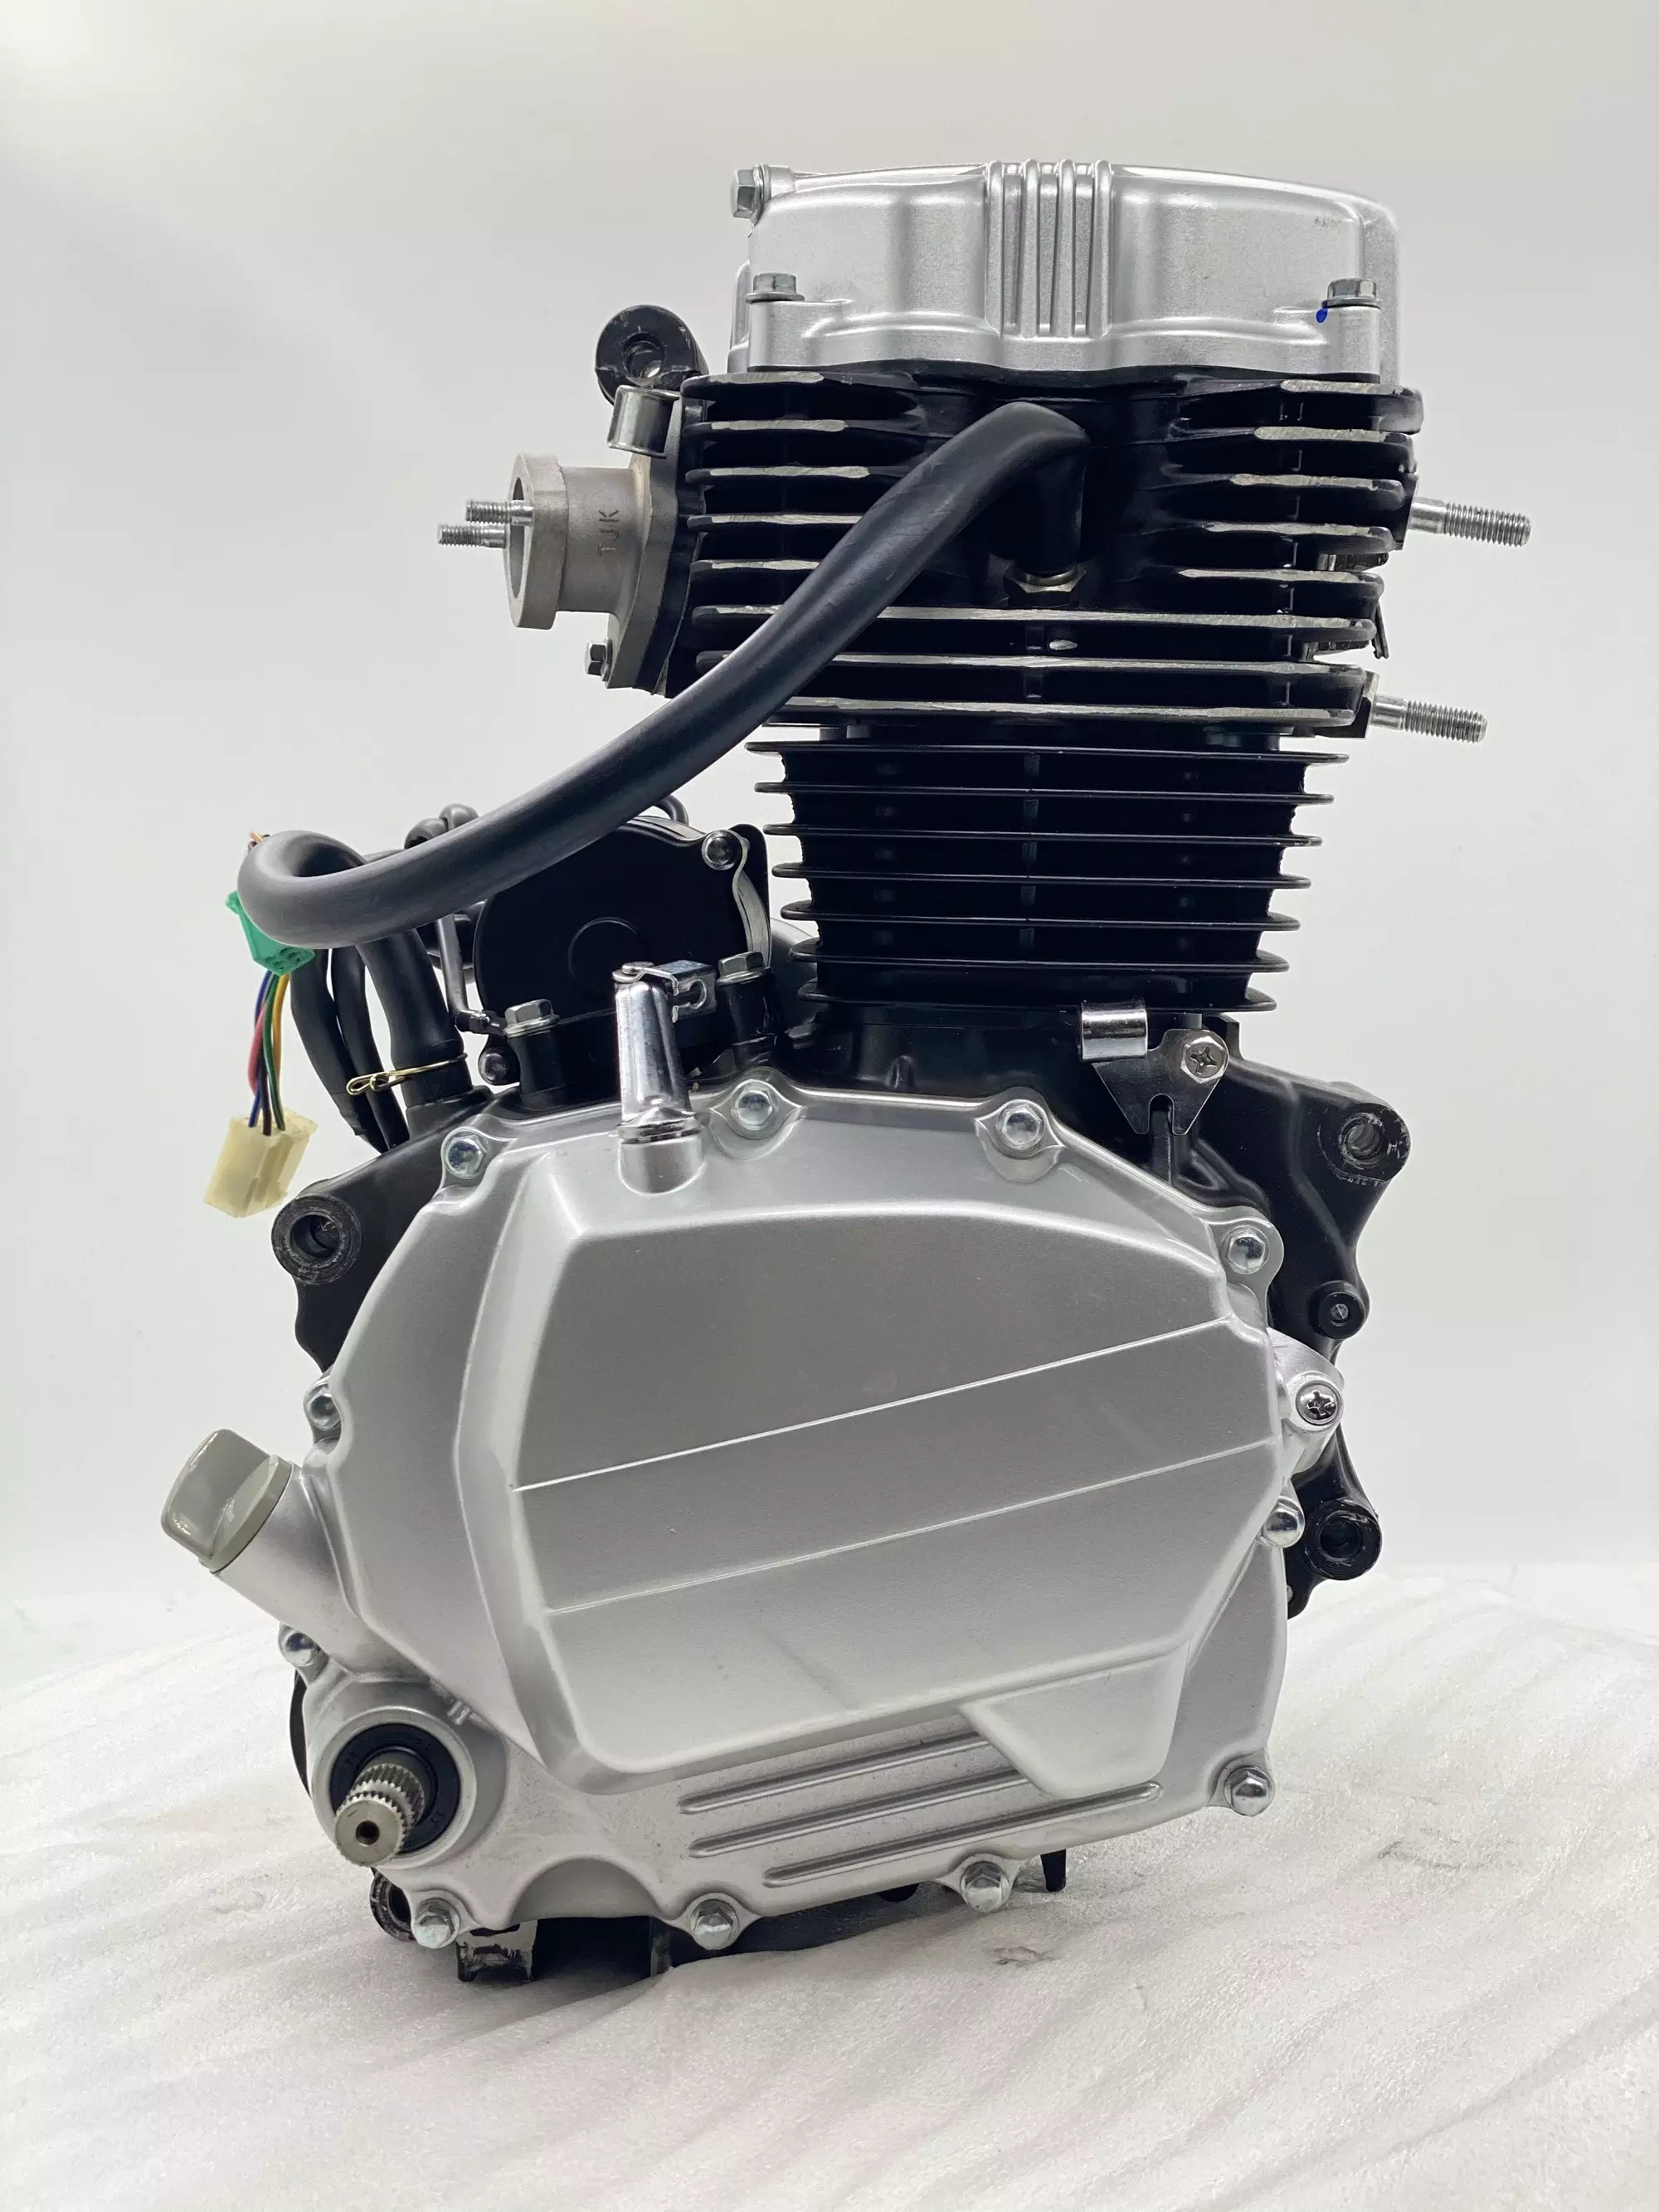 Complete Motorcycle Engines RF-F150cc China Factory high cost performance air class engine assembly for ATV UTV Tricycle